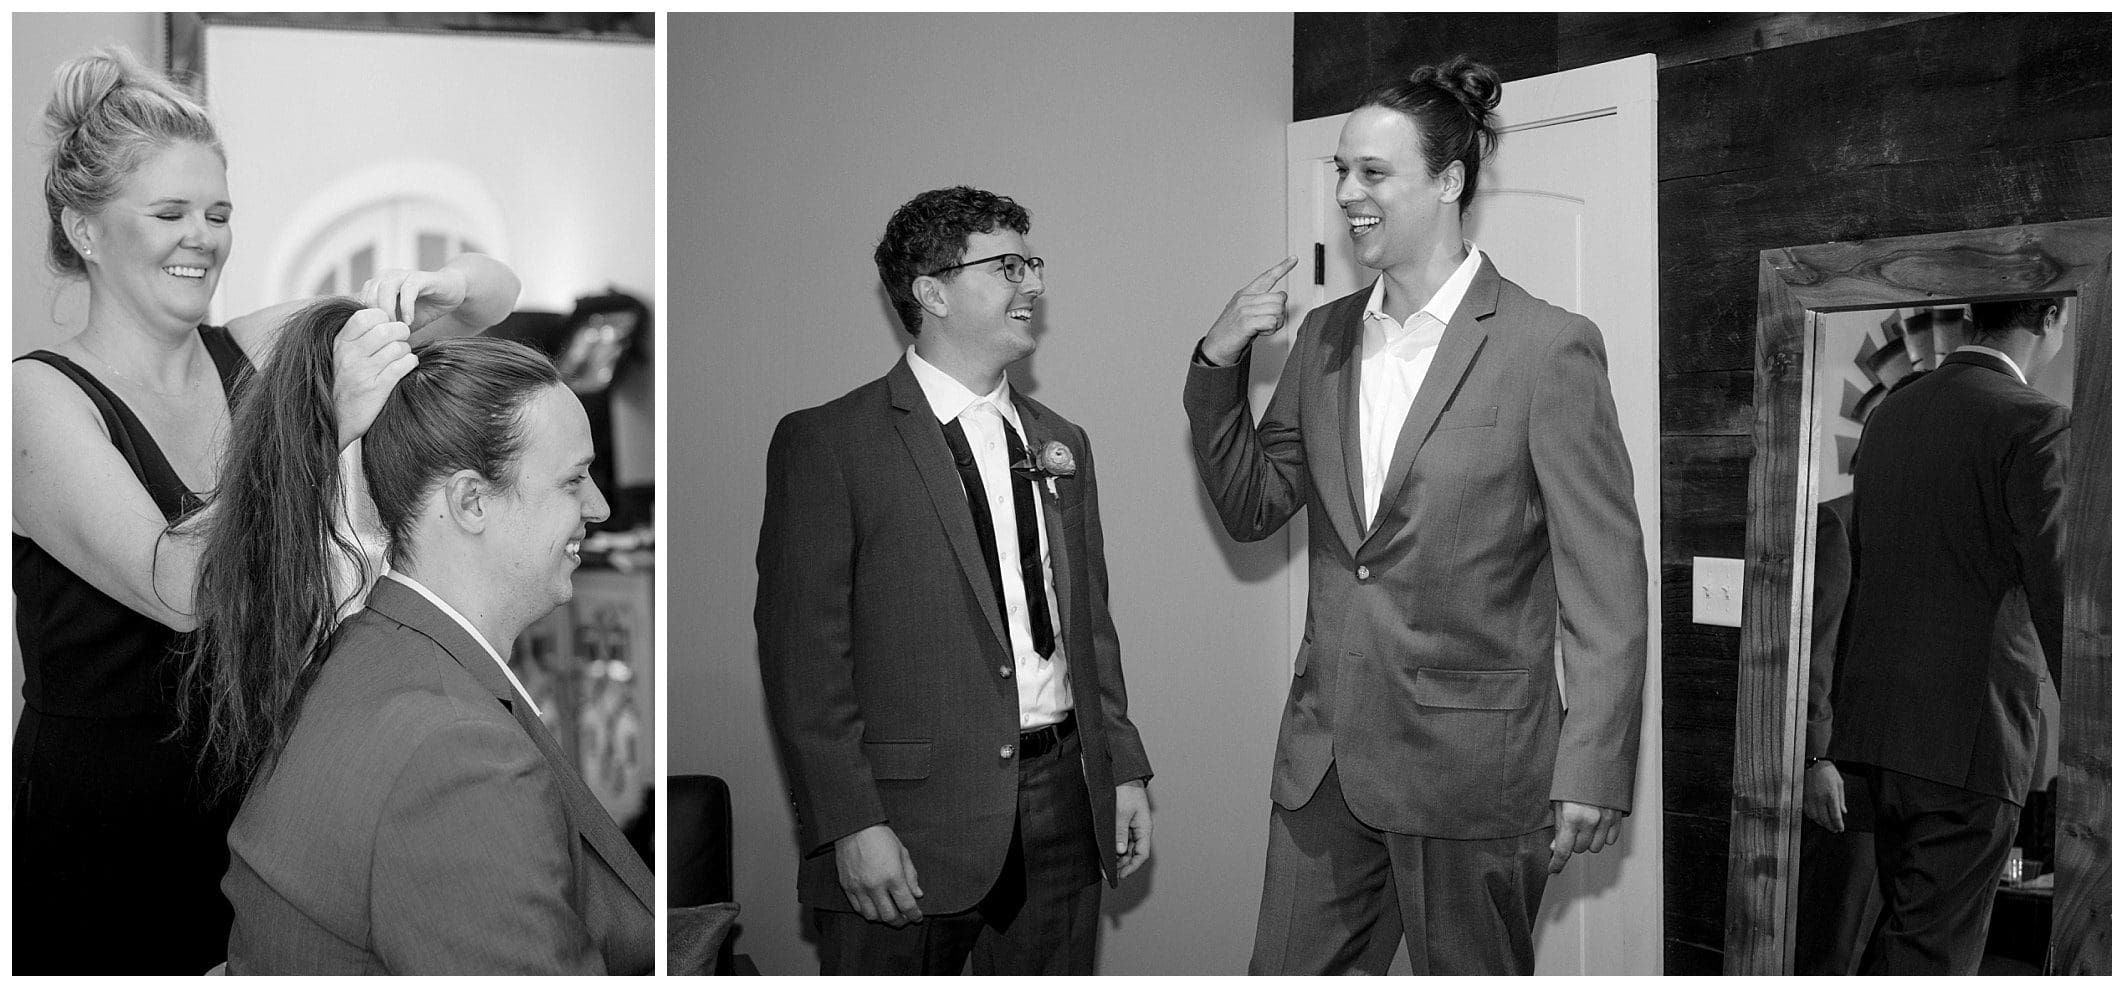 Black and white photos of groomsman getting ready for a wedding.